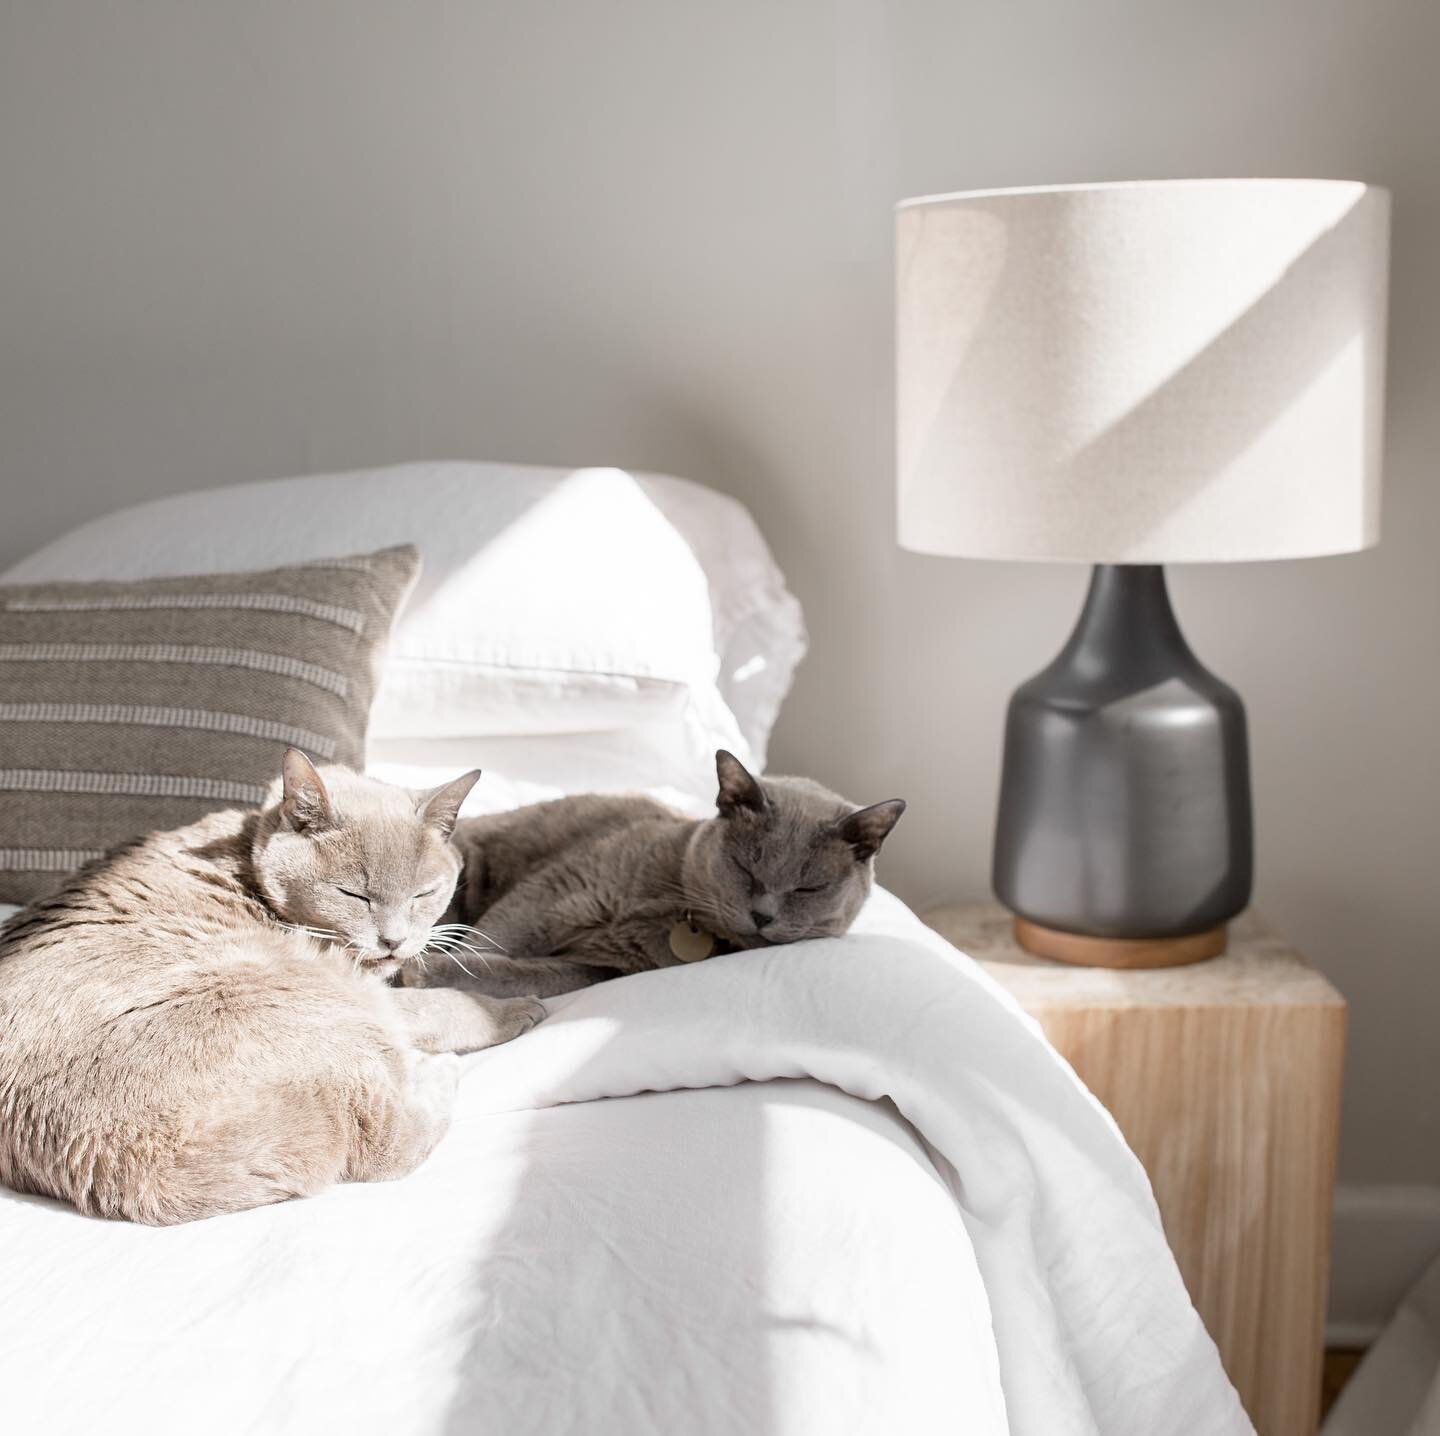 Who else feels like a nap this time of day? We&rsquo;re pro naps around here...
.
.
.
.
#naptime #catnap #catsofinstagram #burmesecatsofinstagram #cats #nap #bedroom #bedroomdecor #pets #selfcare #afternoonnap #home #homesweethome #keepitsimple #simp